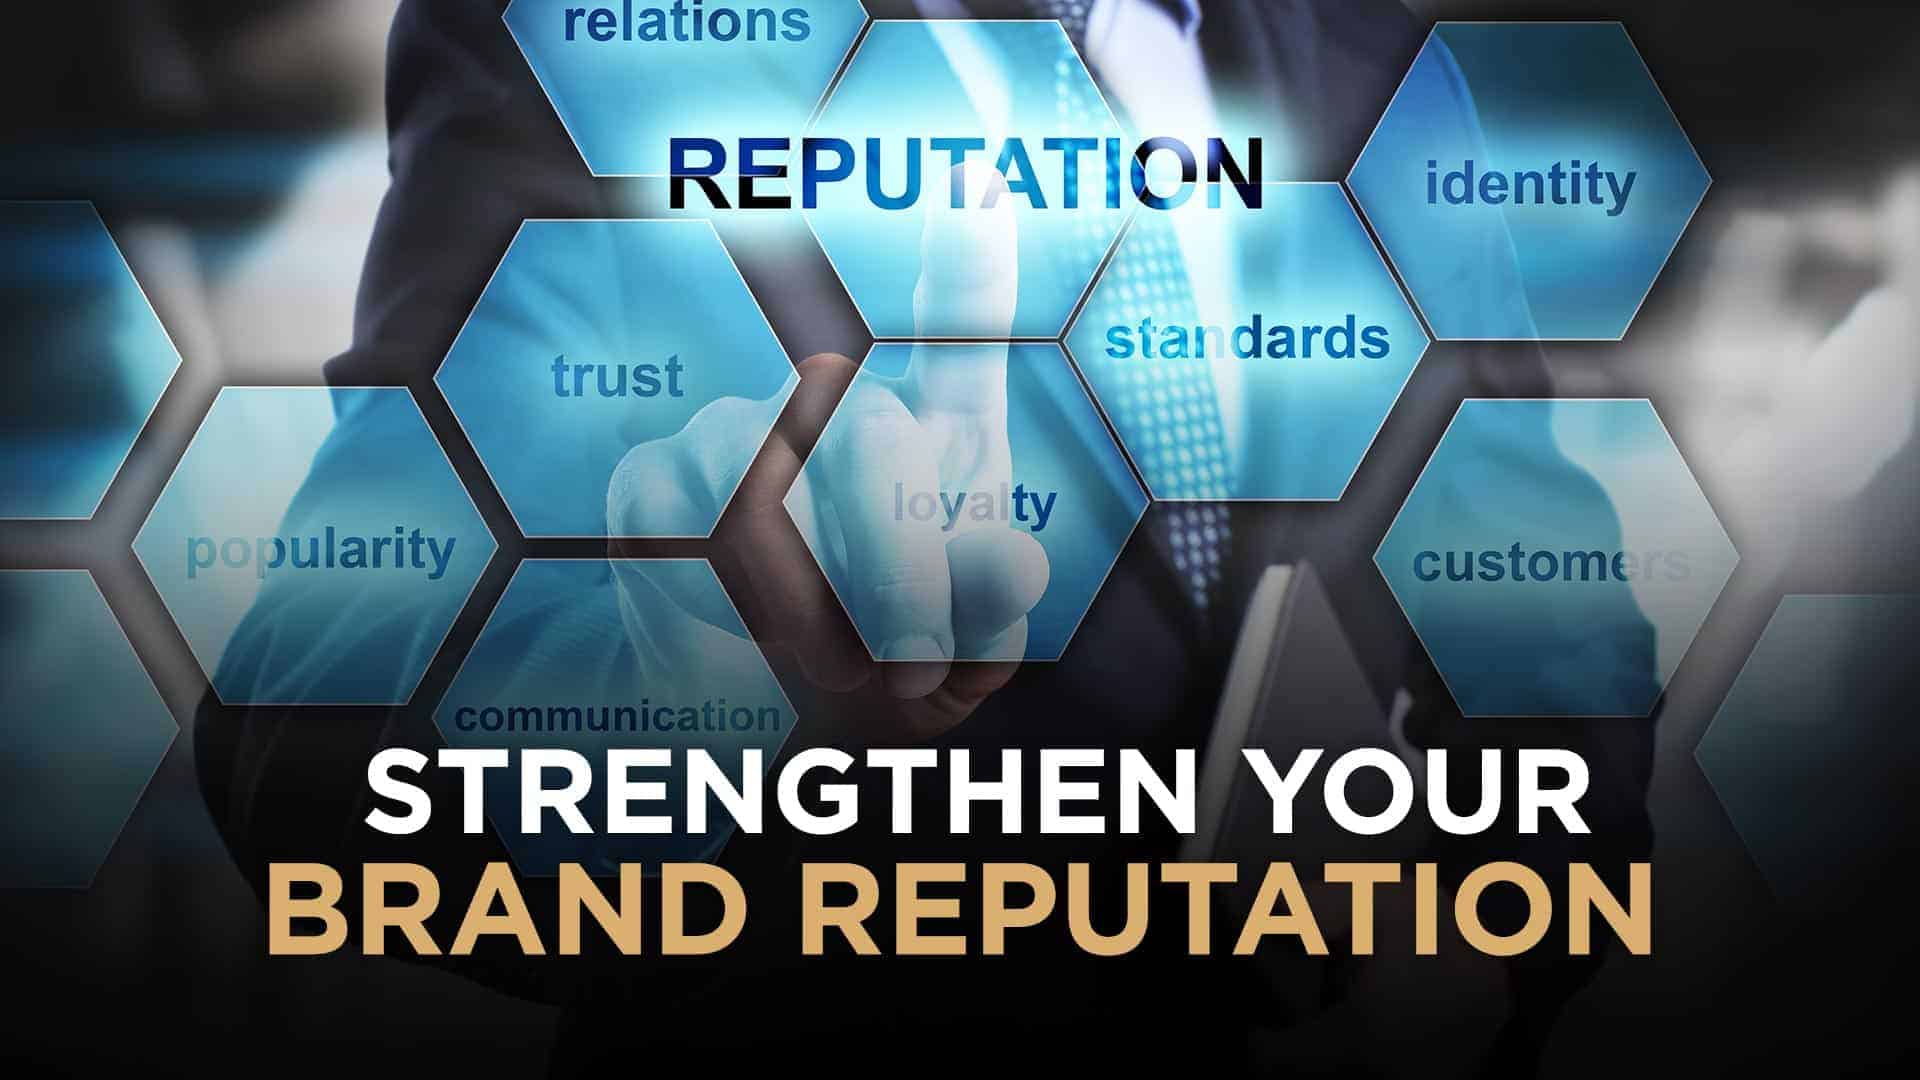 How-To-Strengthen-Your-Brand-Reputation-By-Using-Disruptive-TechnologiesHow To Strengthen Your Brand Reputation By Using Disruptive Technologies